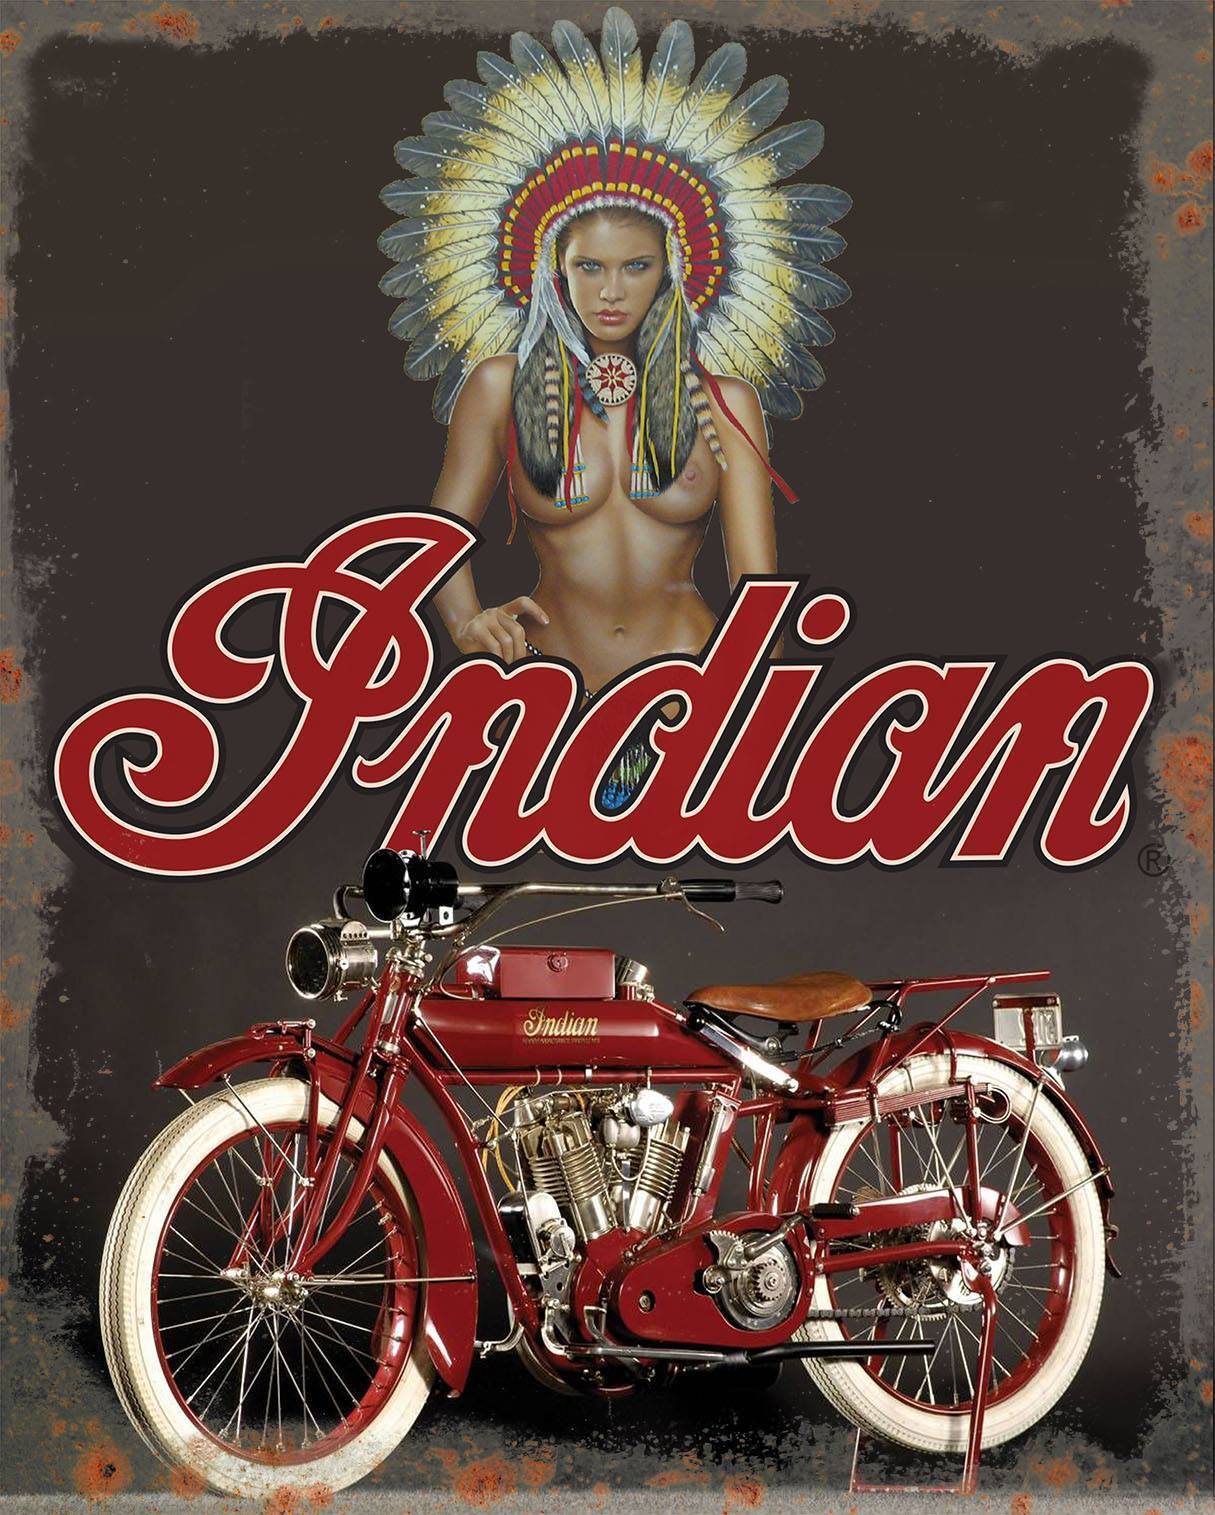 American Indian motorcycle vintage reproduction on 8x10 in aluminum